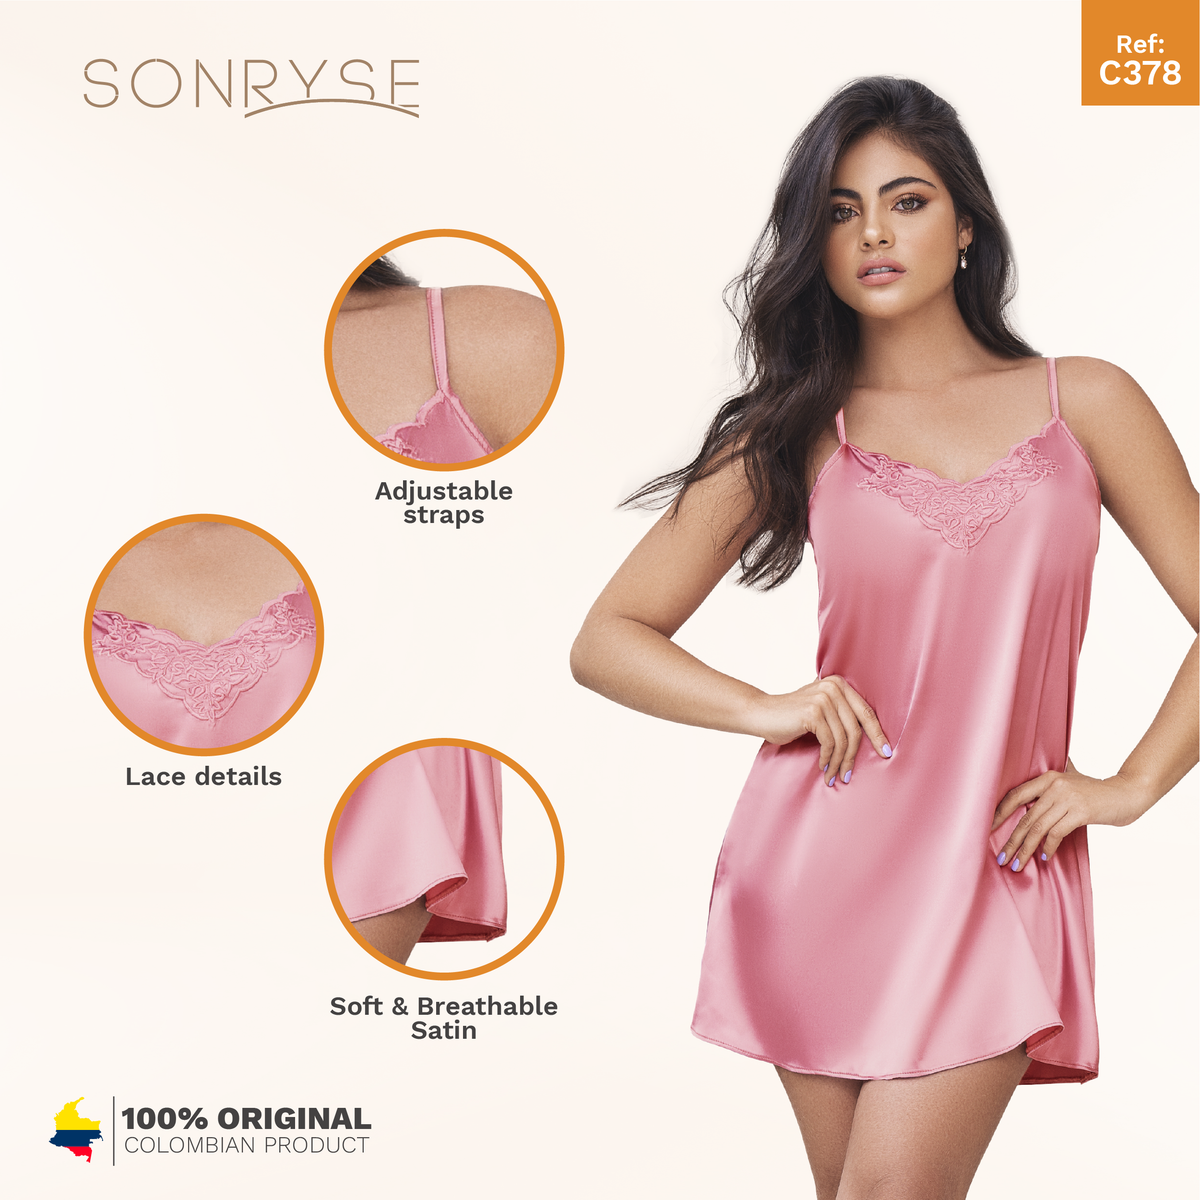 SONRYSE 378 Satin Dress Silk Robes for Women with Lace Details